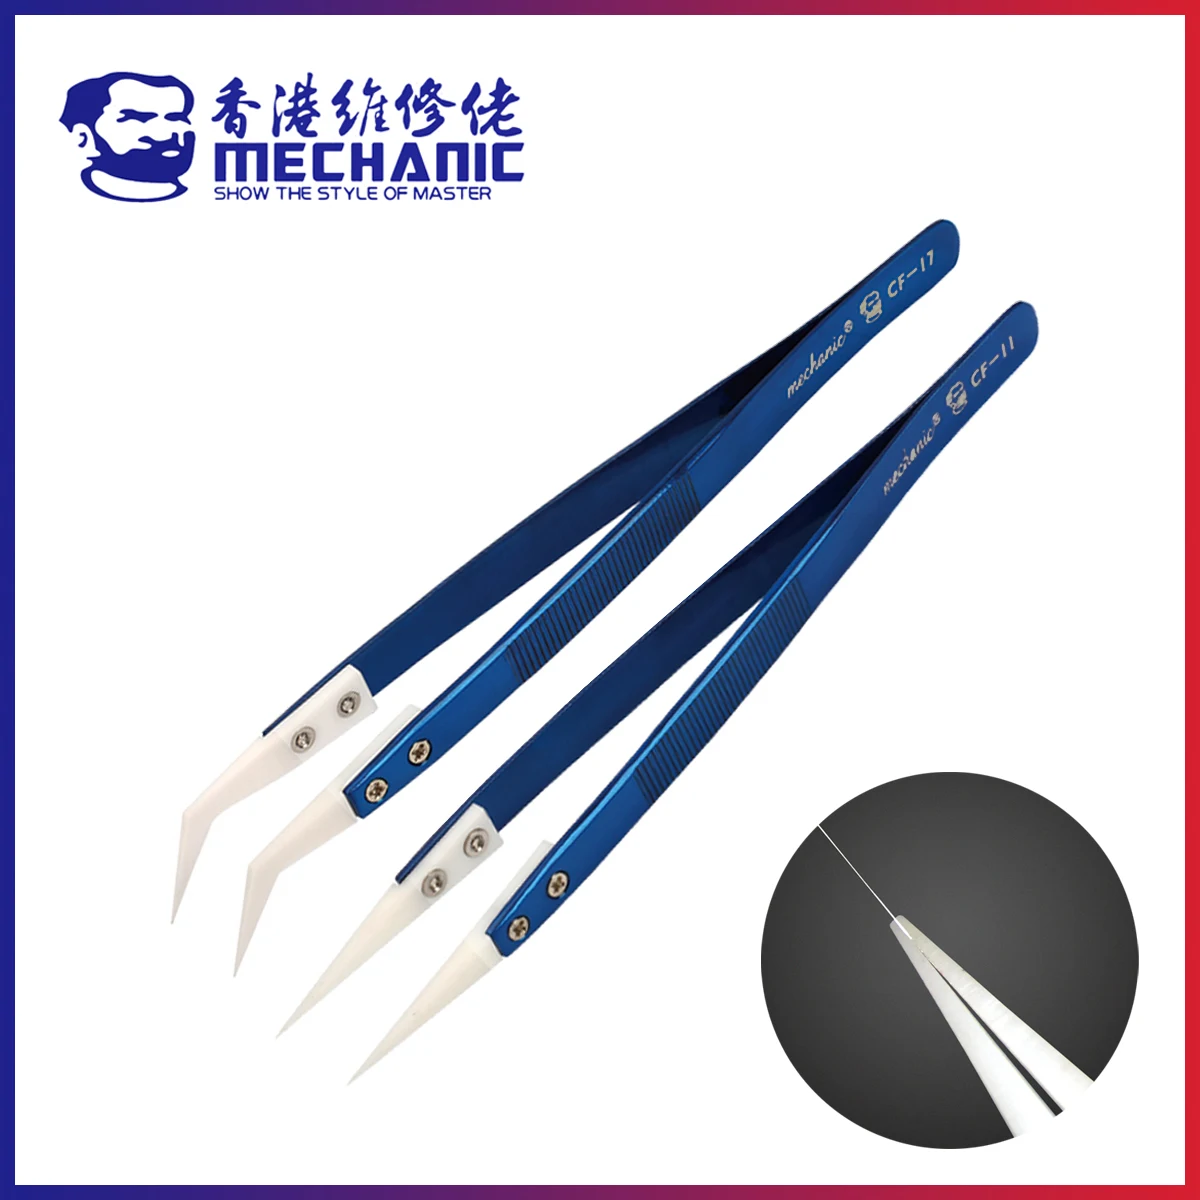 MECHANIC CF Series High Precision Insulation Ceramic Anti-magnetic Anti-Static Special Tweezers For Phone Flying Wire Repair